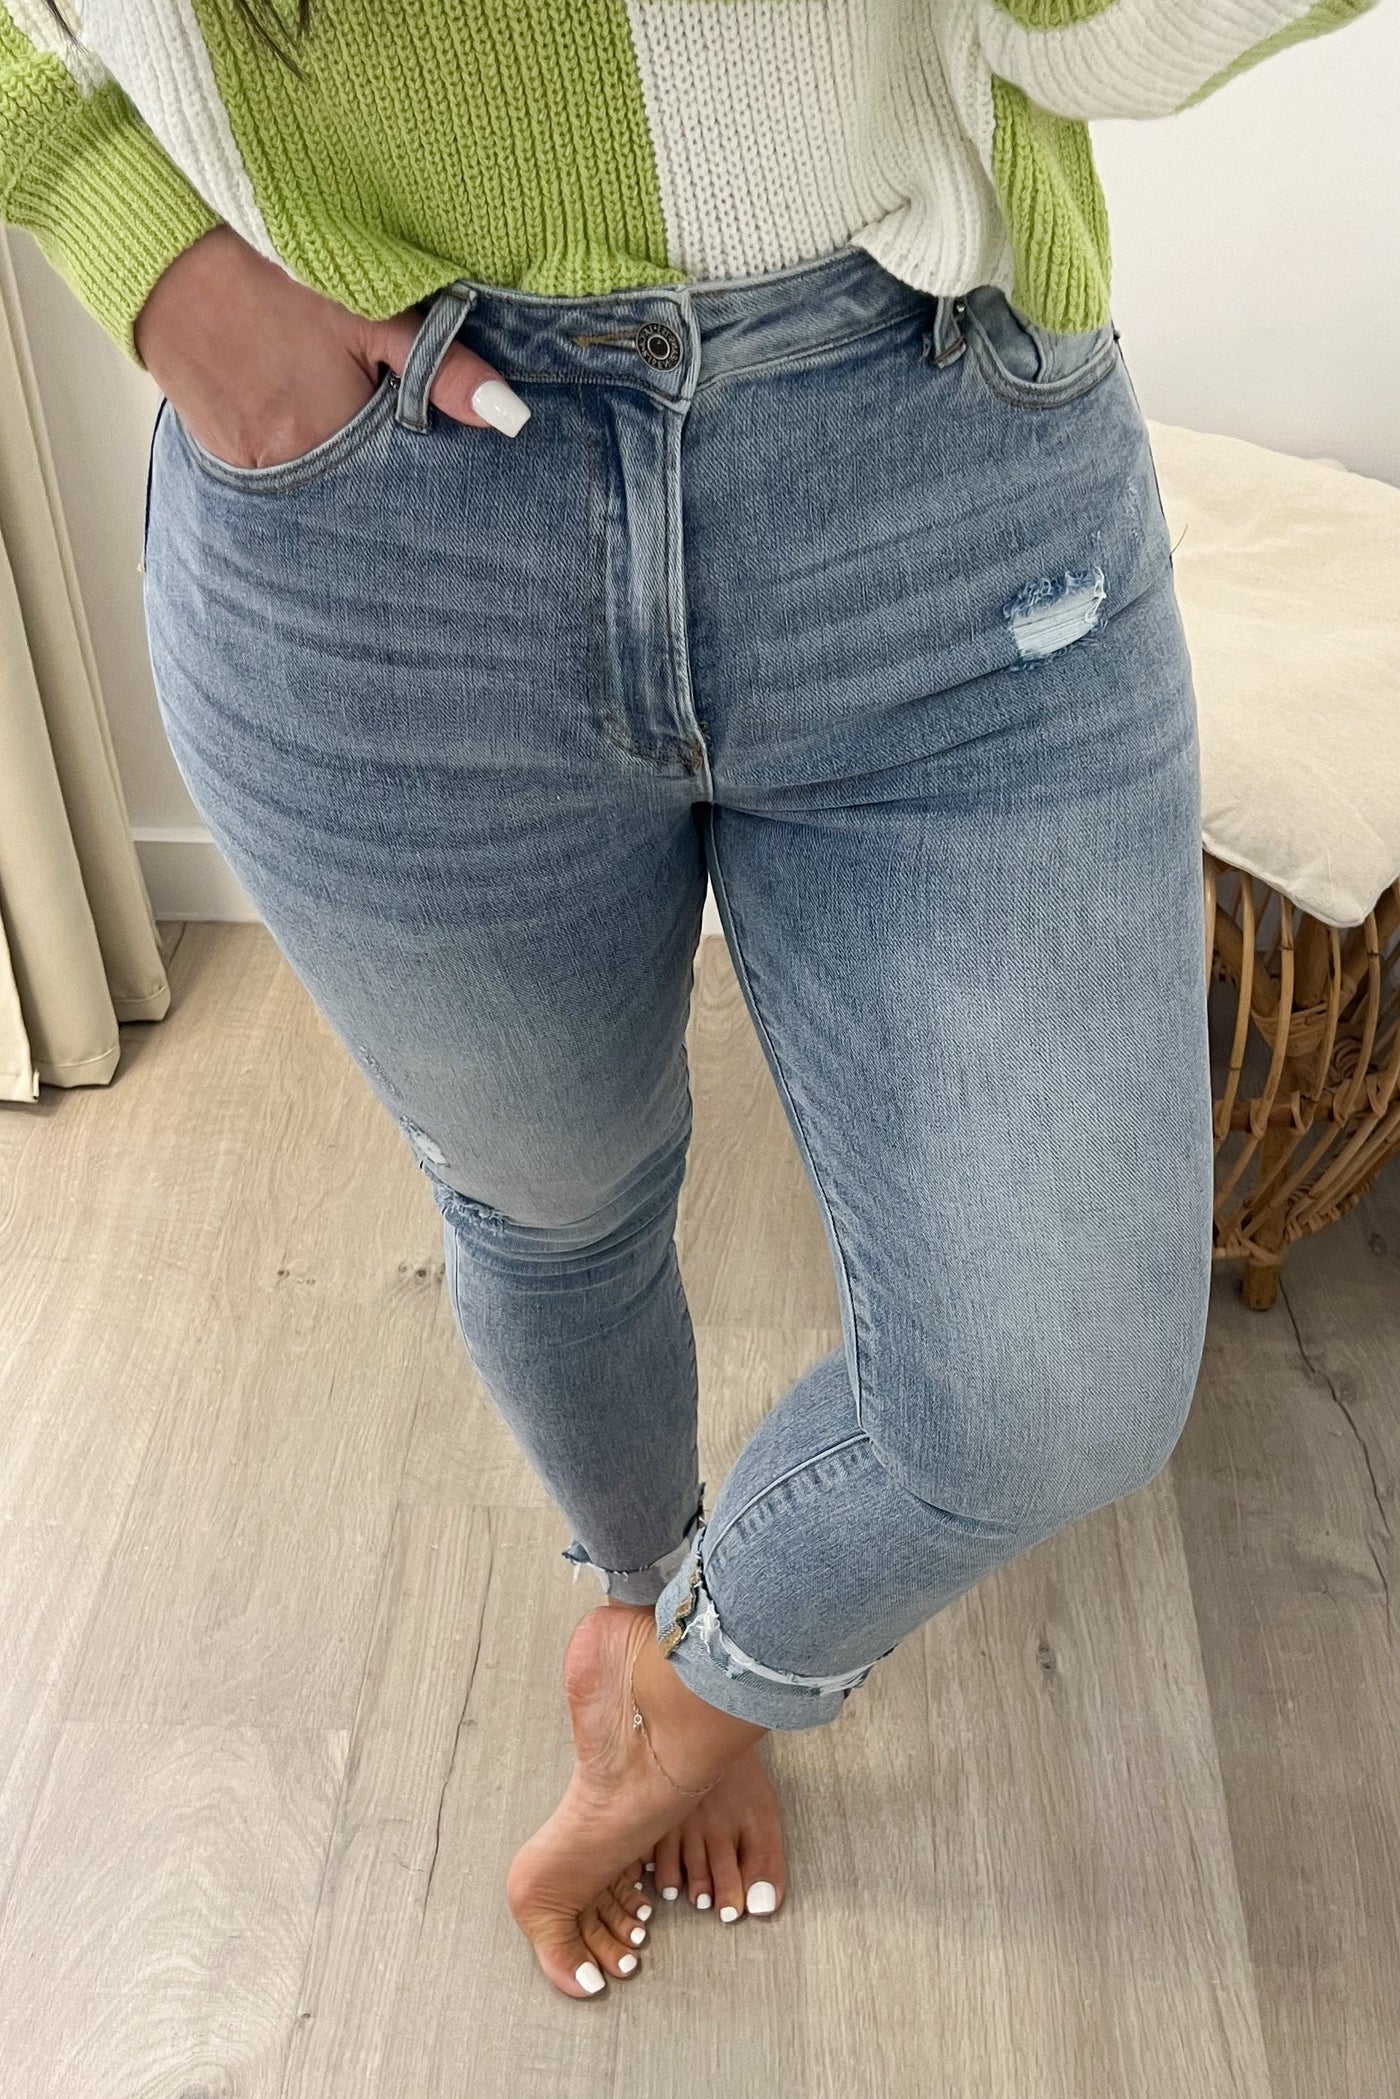 Tatum Skinny Jeans - Happily Ever Aften